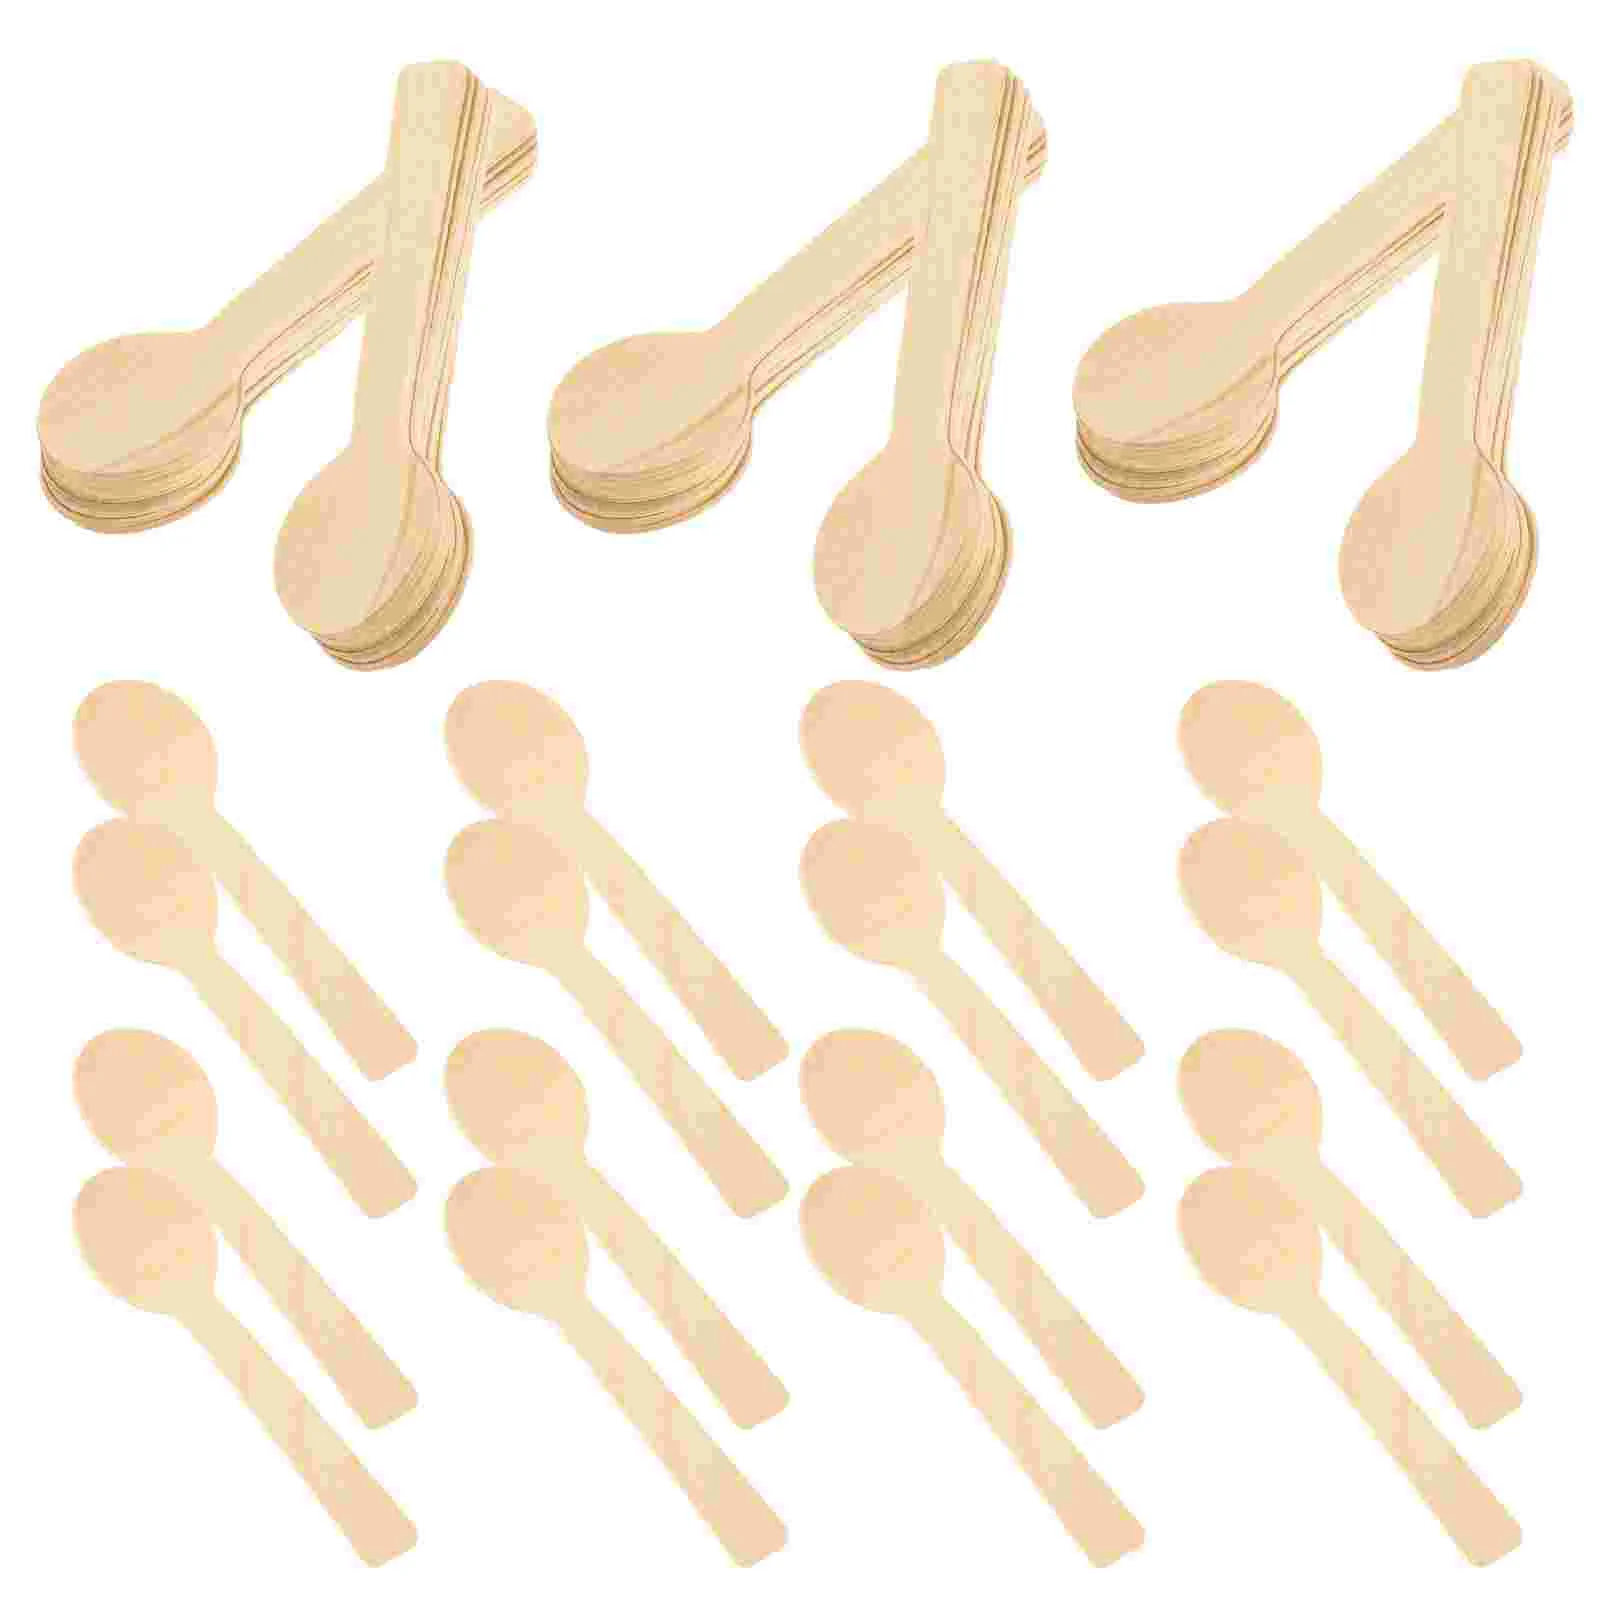 

100pcs Caviar Spoons Ice Cream Spoon Bamboo Dessert Spoon Tablespoon Soup Serving Spoons